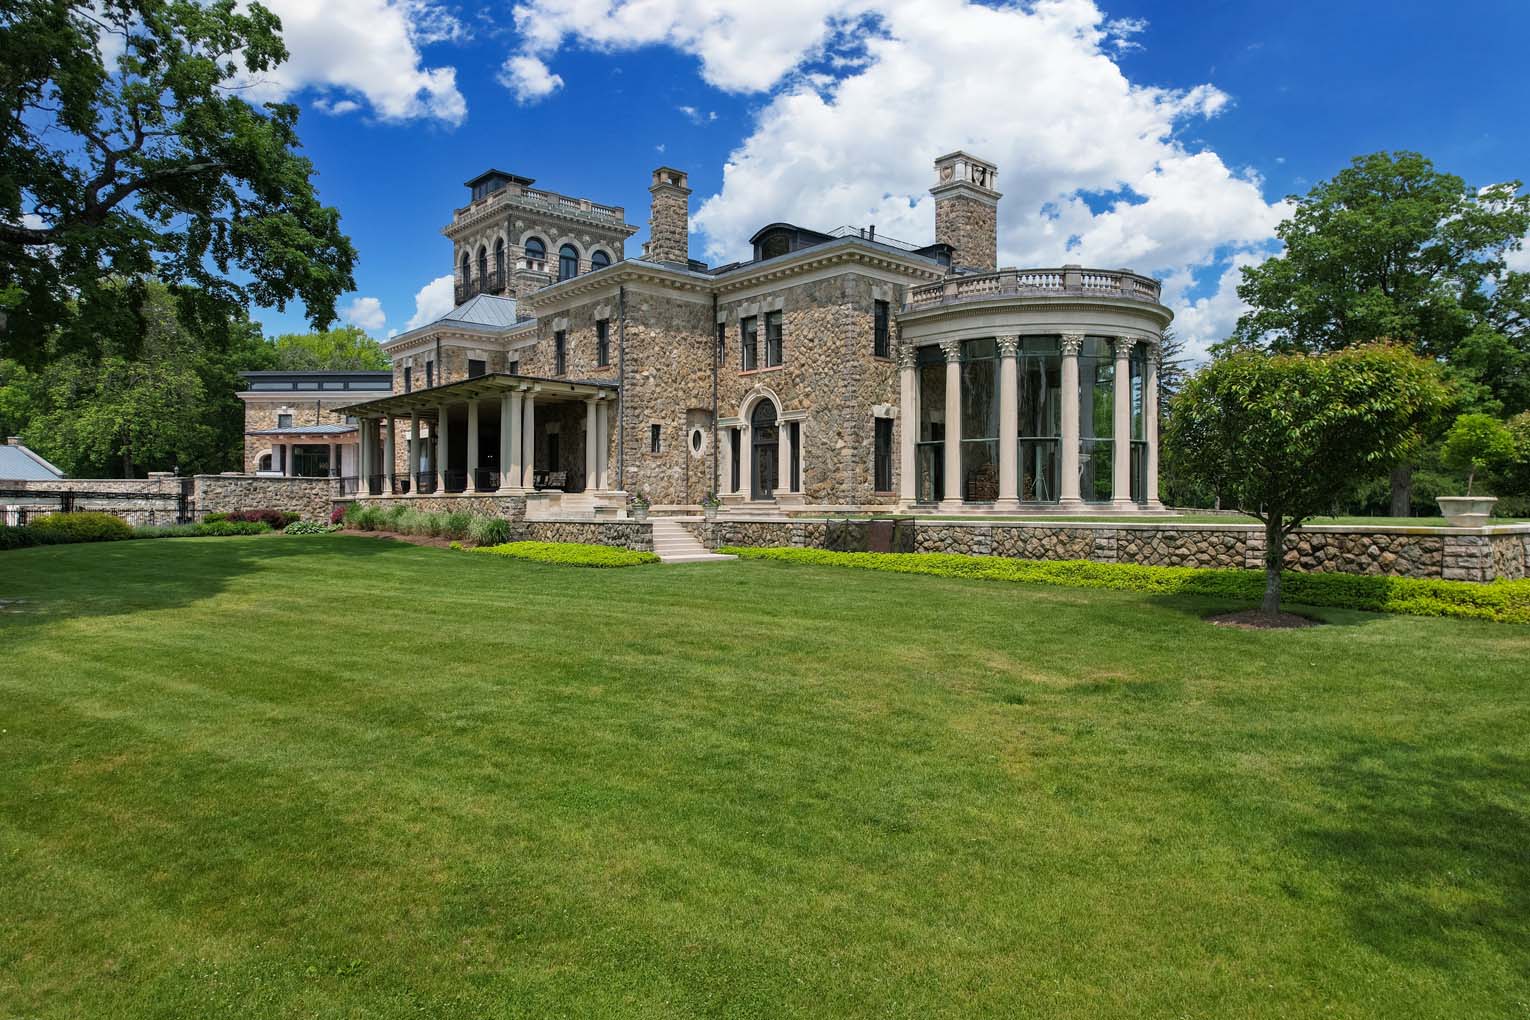 A big stone house with pillars in its unique older design.